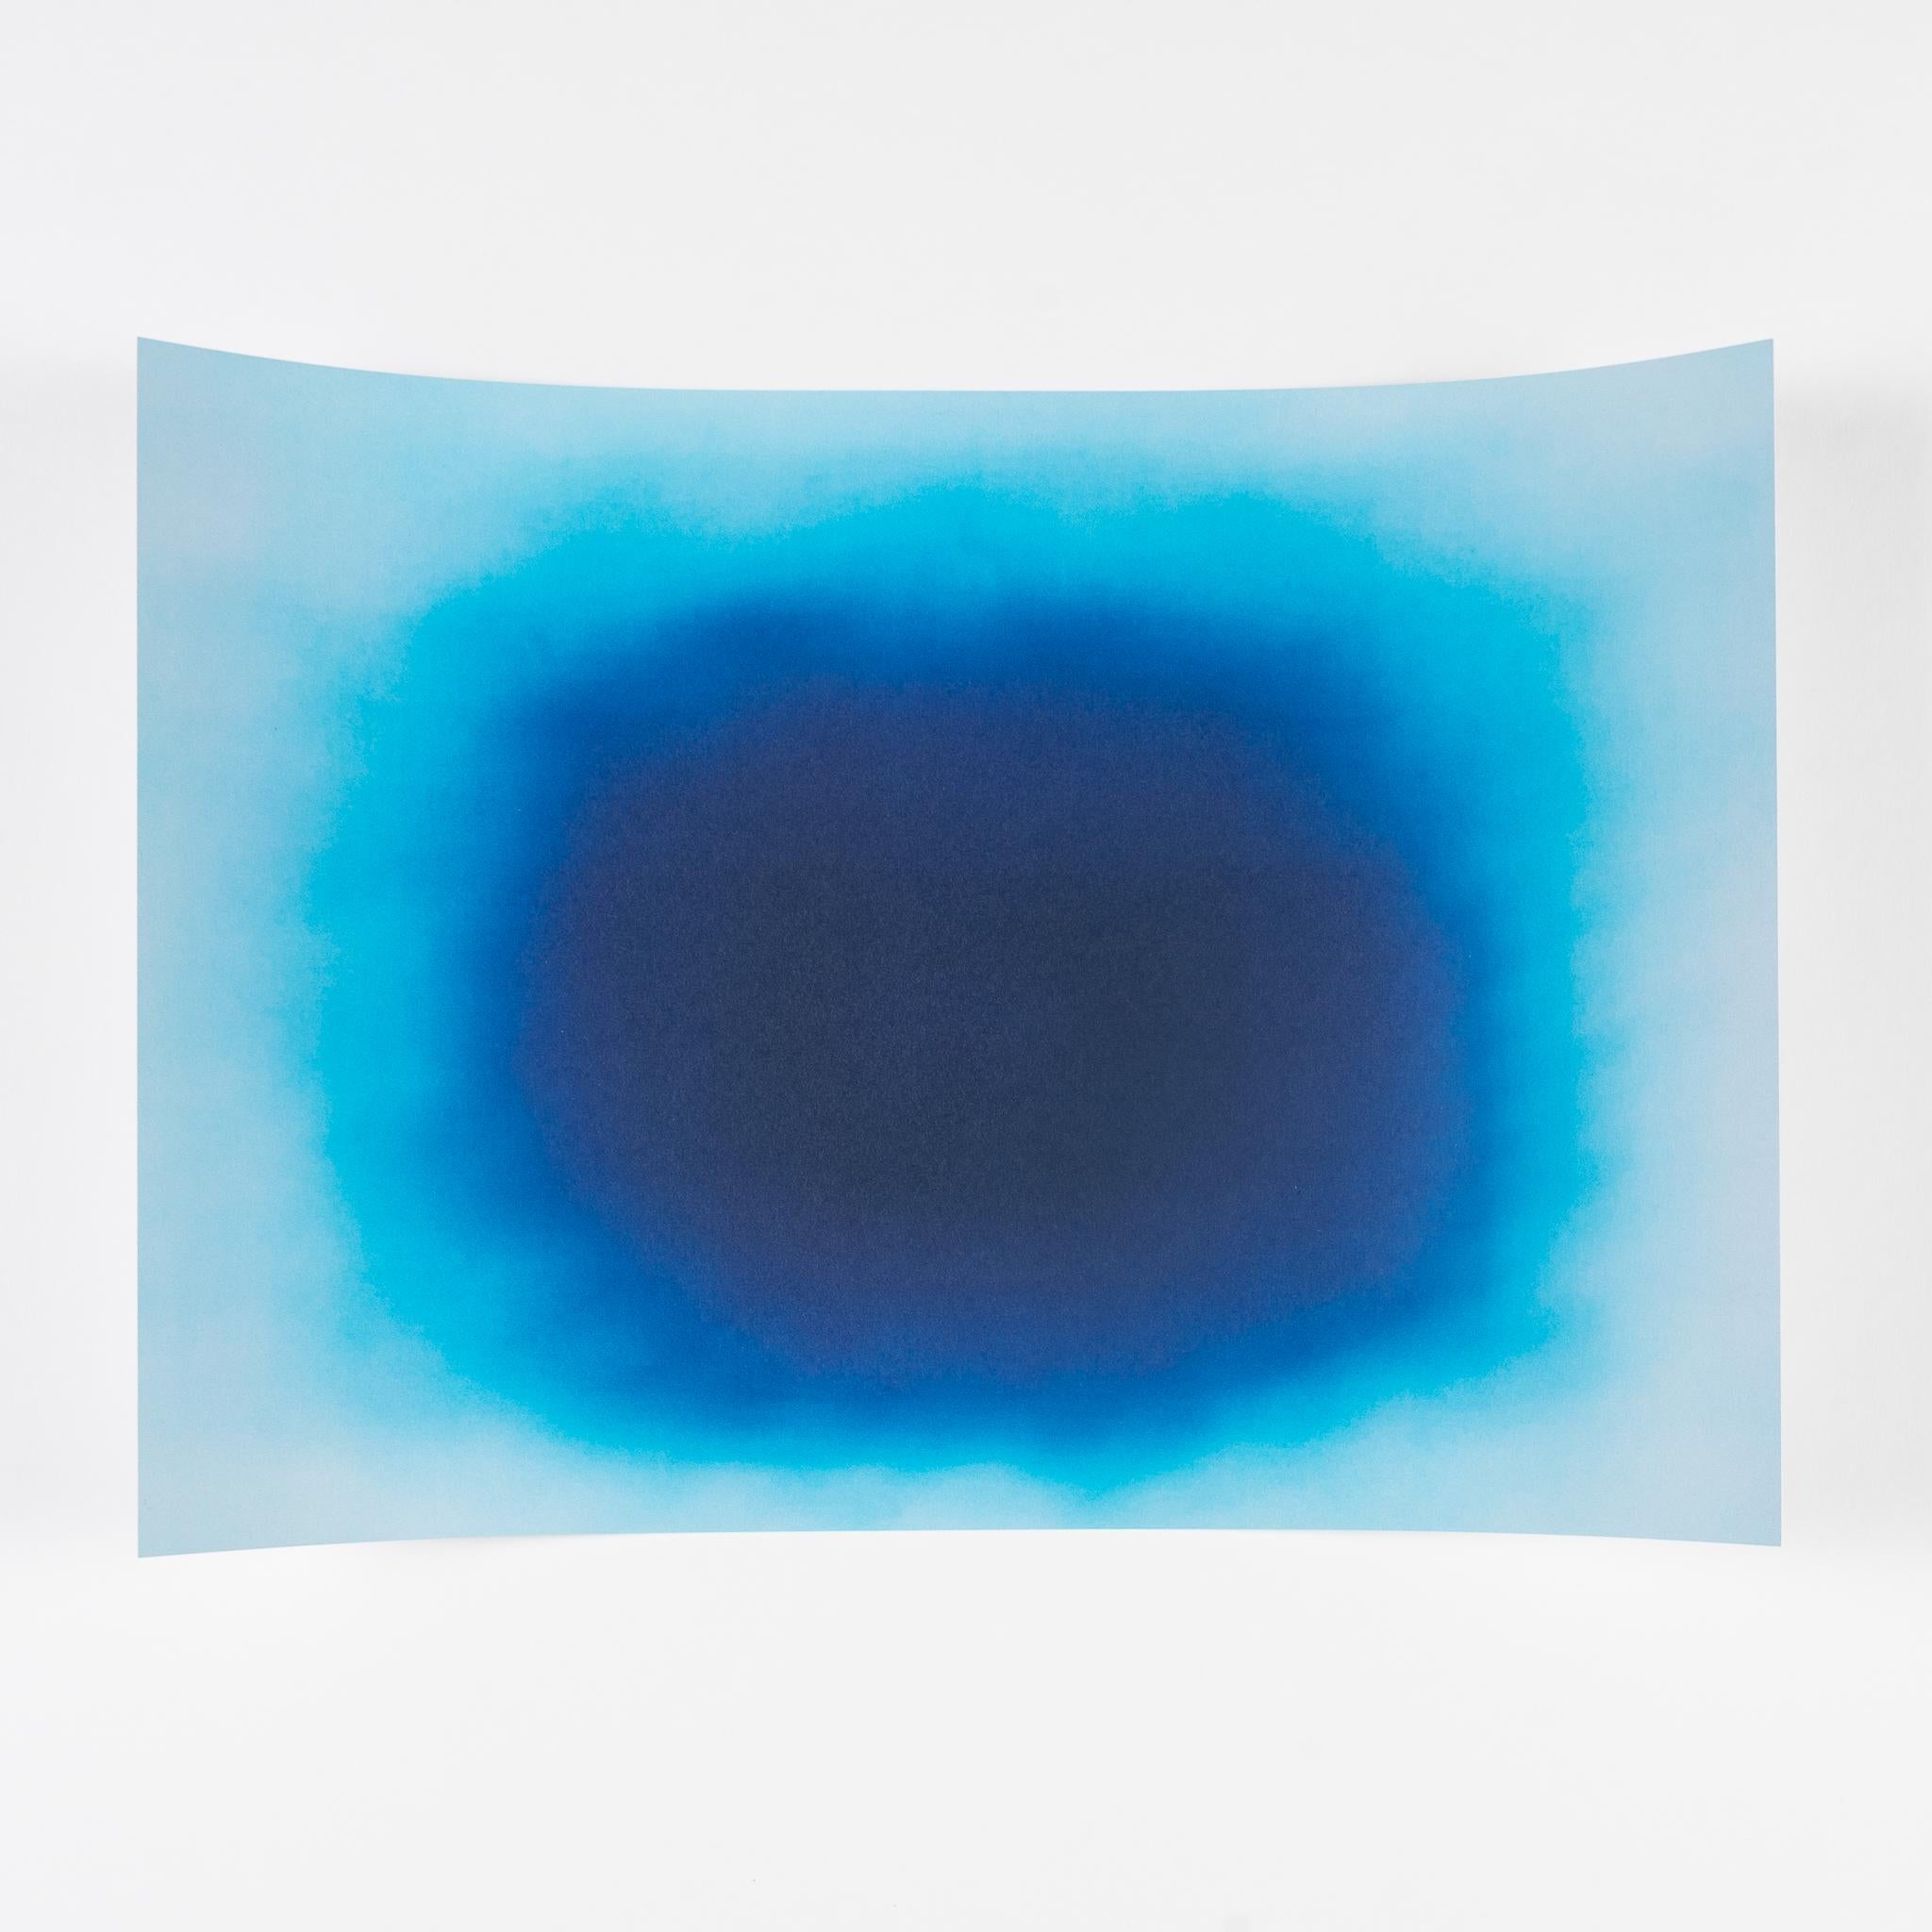 Breathing Blue - Print by Anish Kapoor